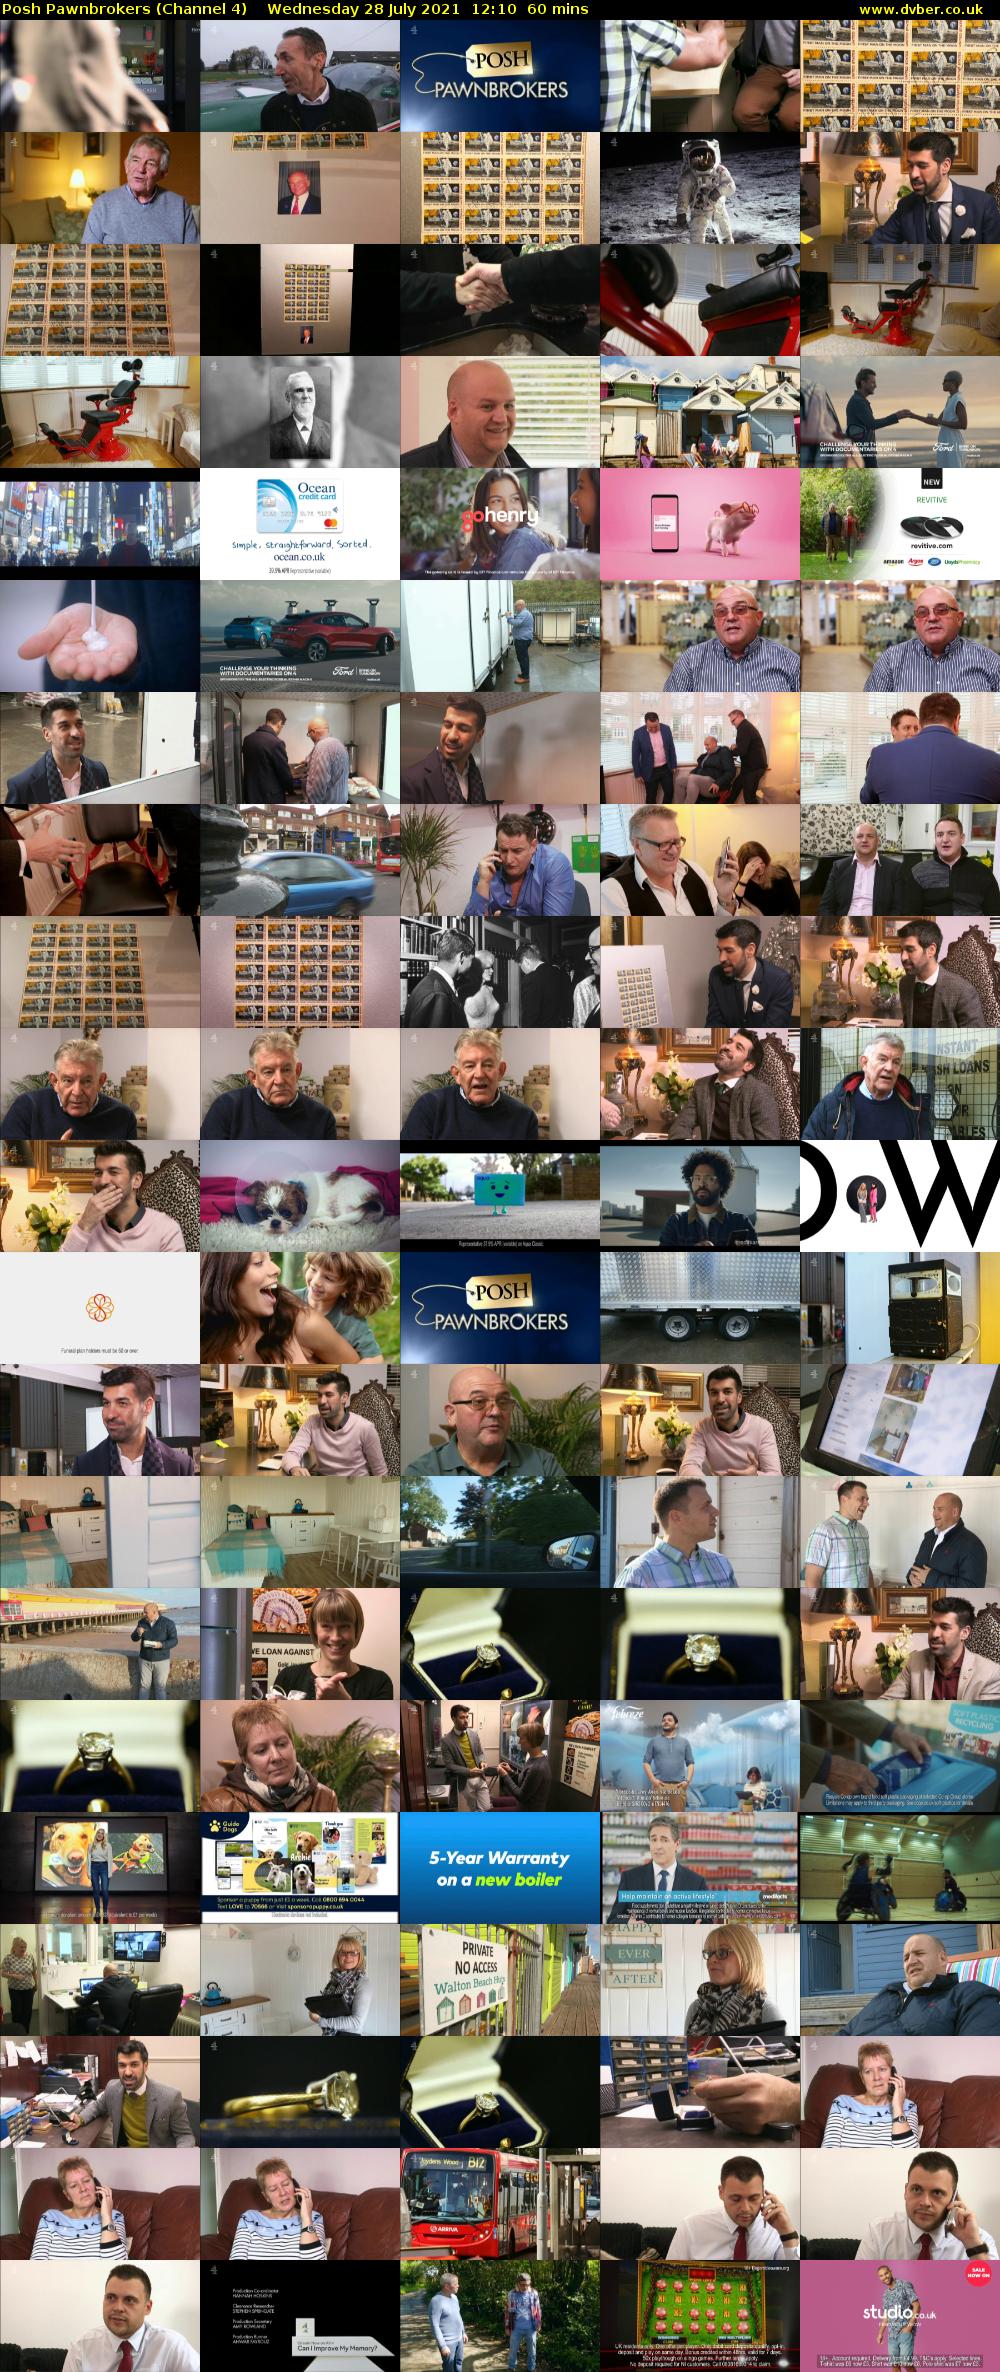 Posh Pawnbrokers (Channel 4) Wednesday 28 July 2021 12:10 - 13:10